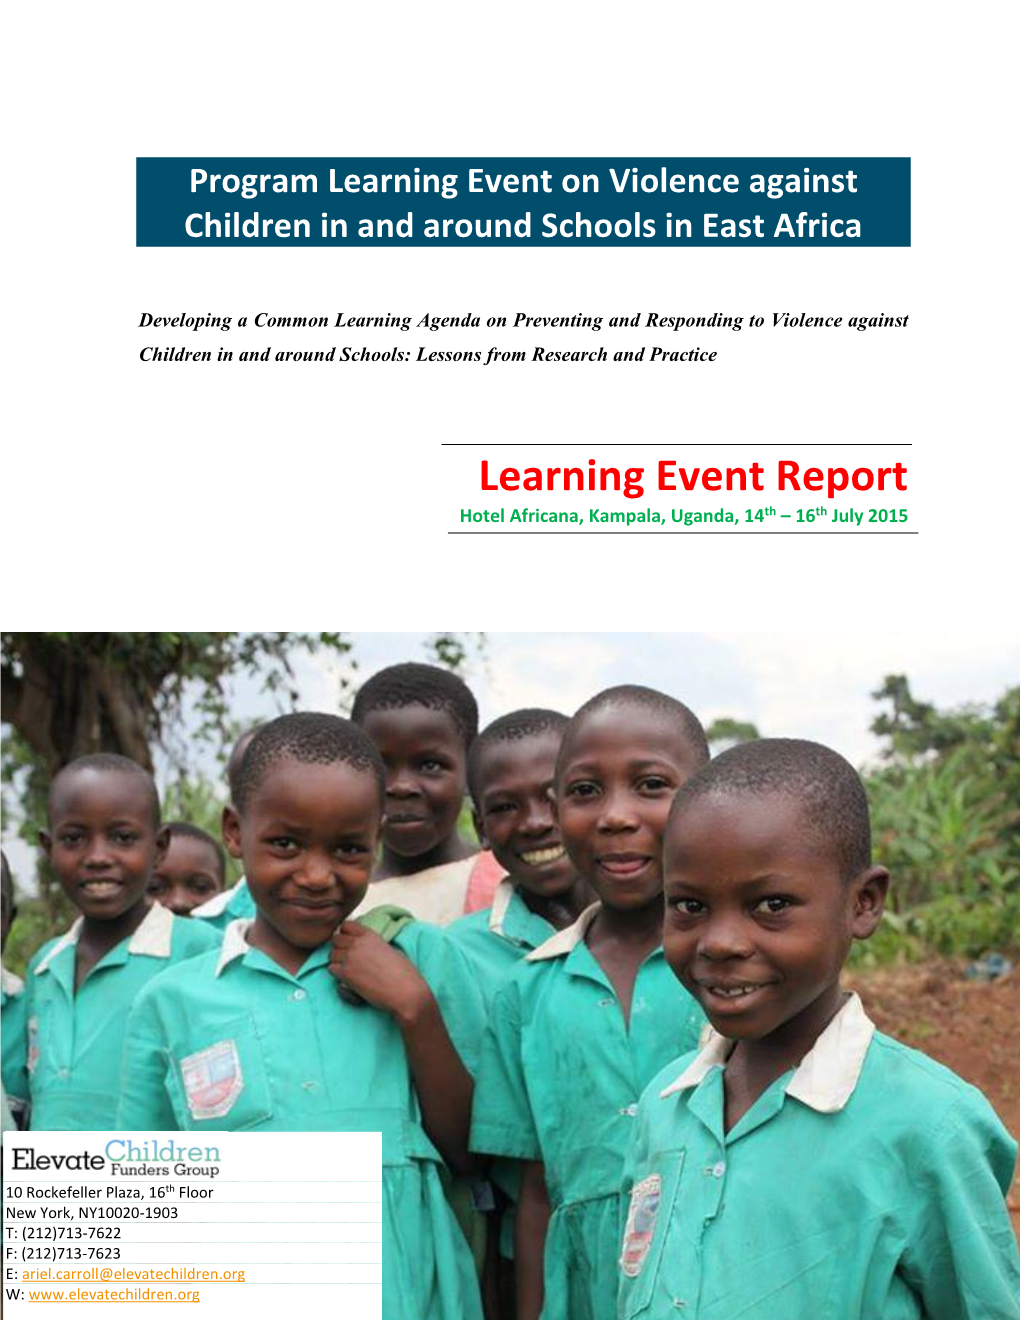 Program Learning Event on Violence Against Children in and Around Schools in East Africa